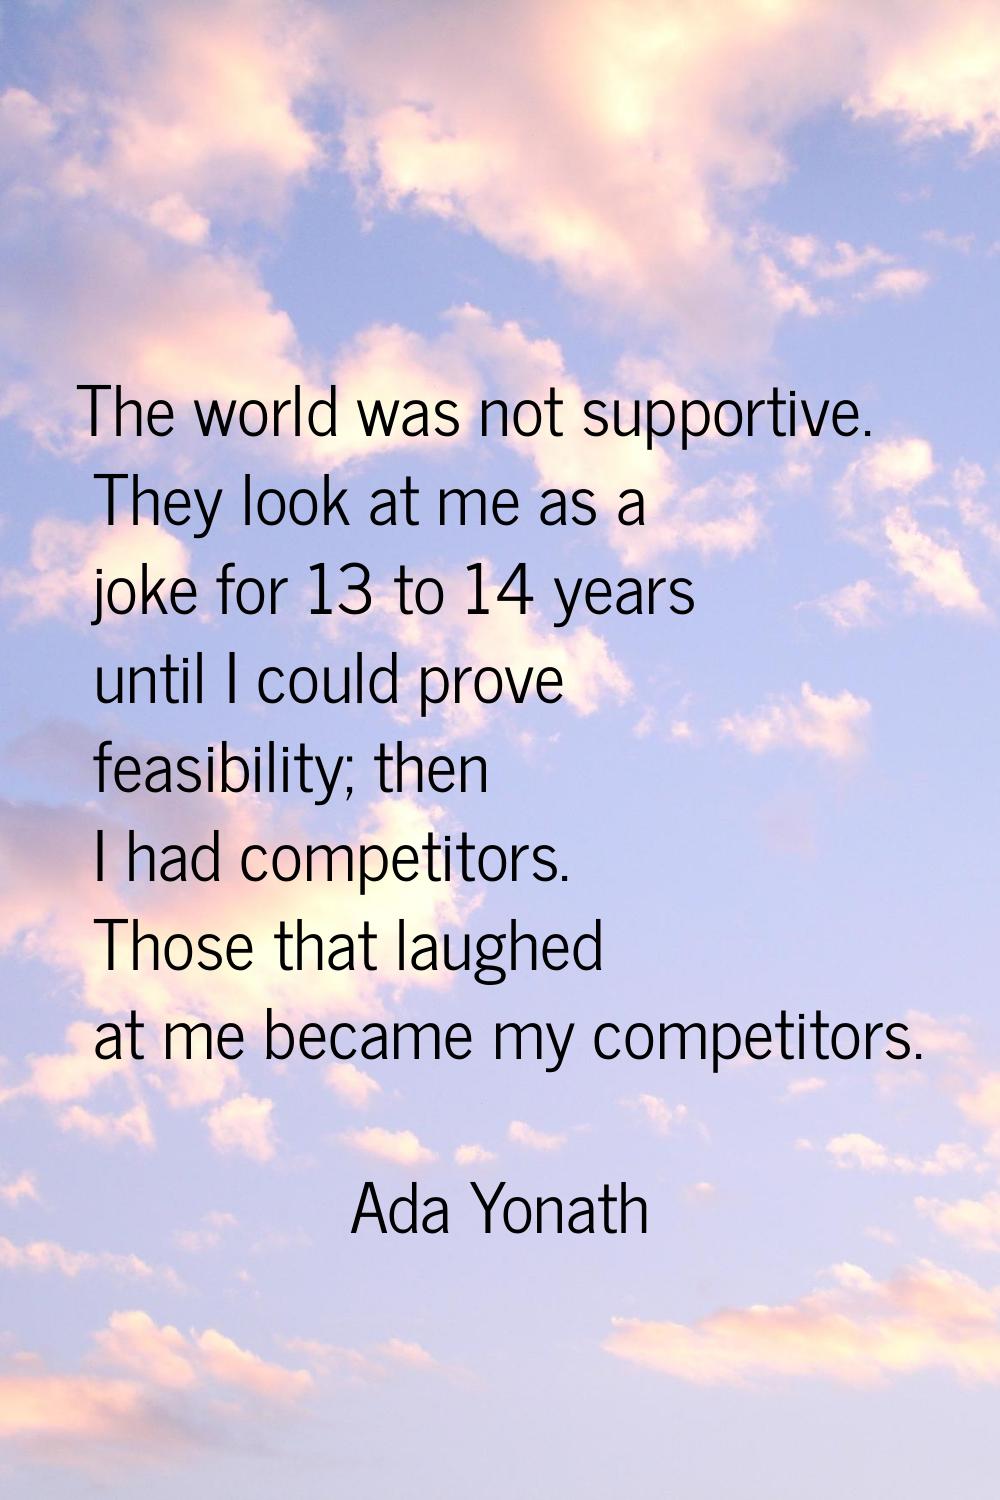 The world was not supportive. They look at me as a joke for 13 to 14 years until I could prove feas